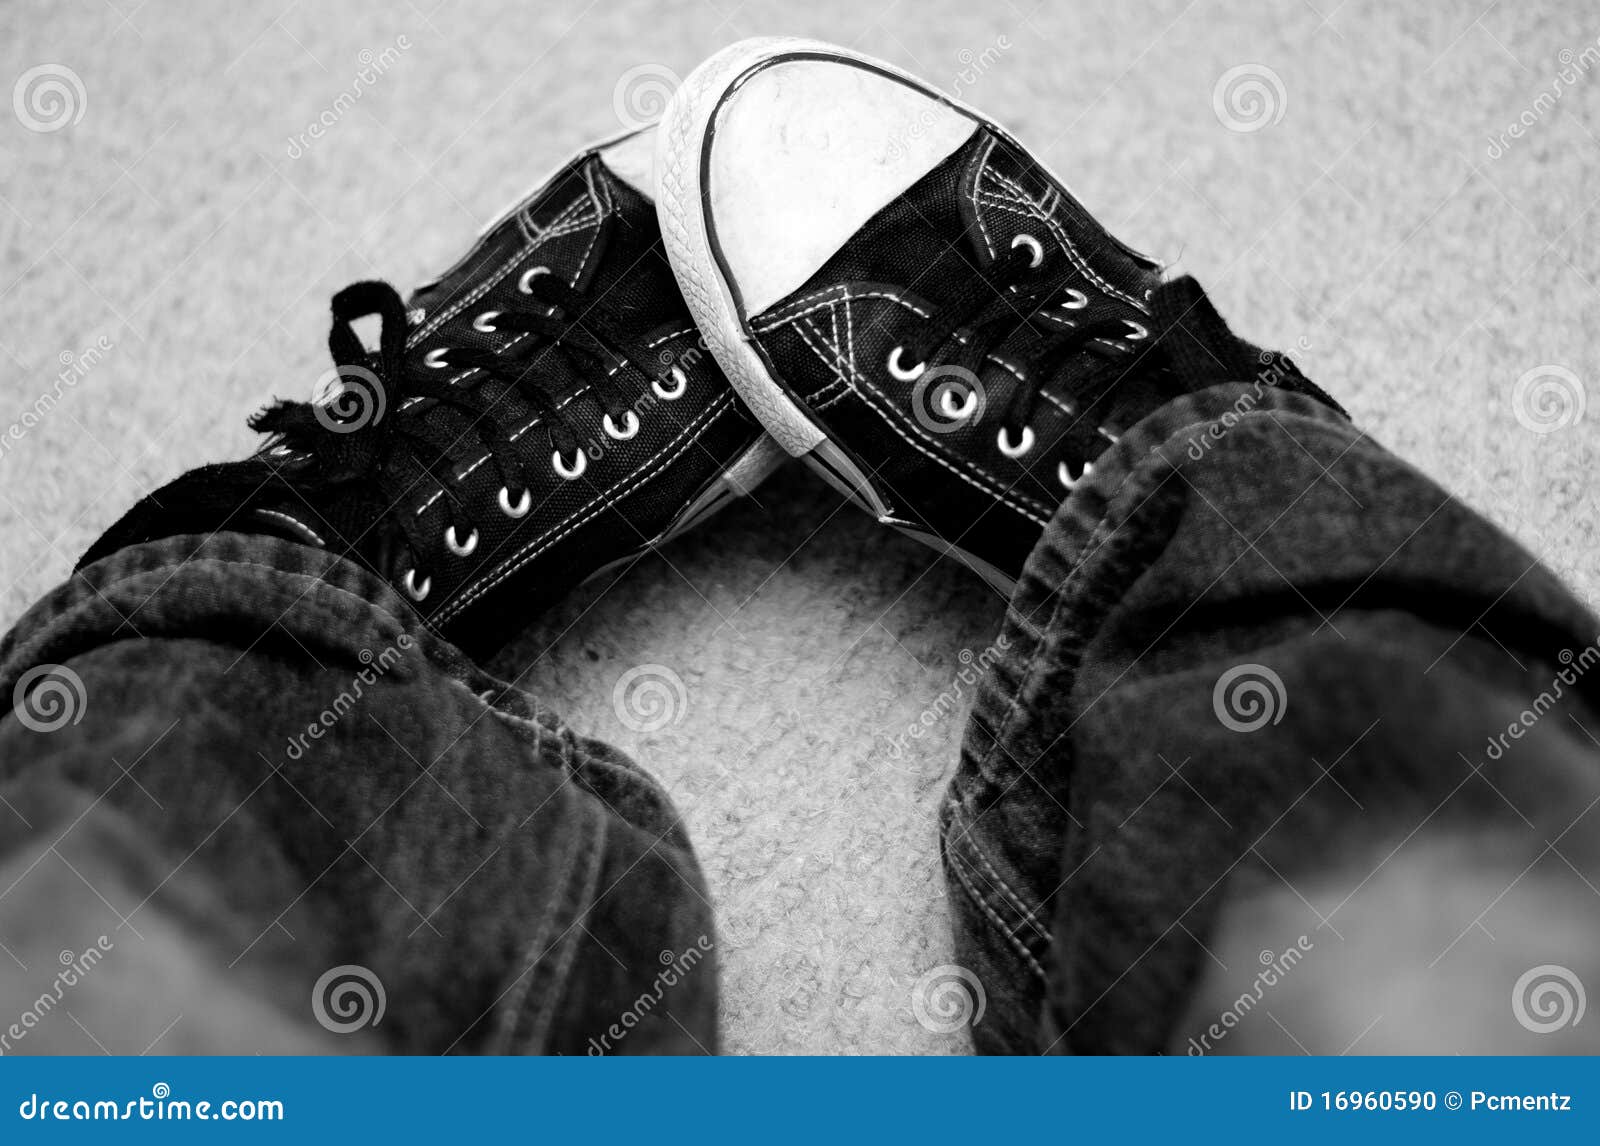 Black and white sneakers stock photo. Image of shoe, classic - 16960590